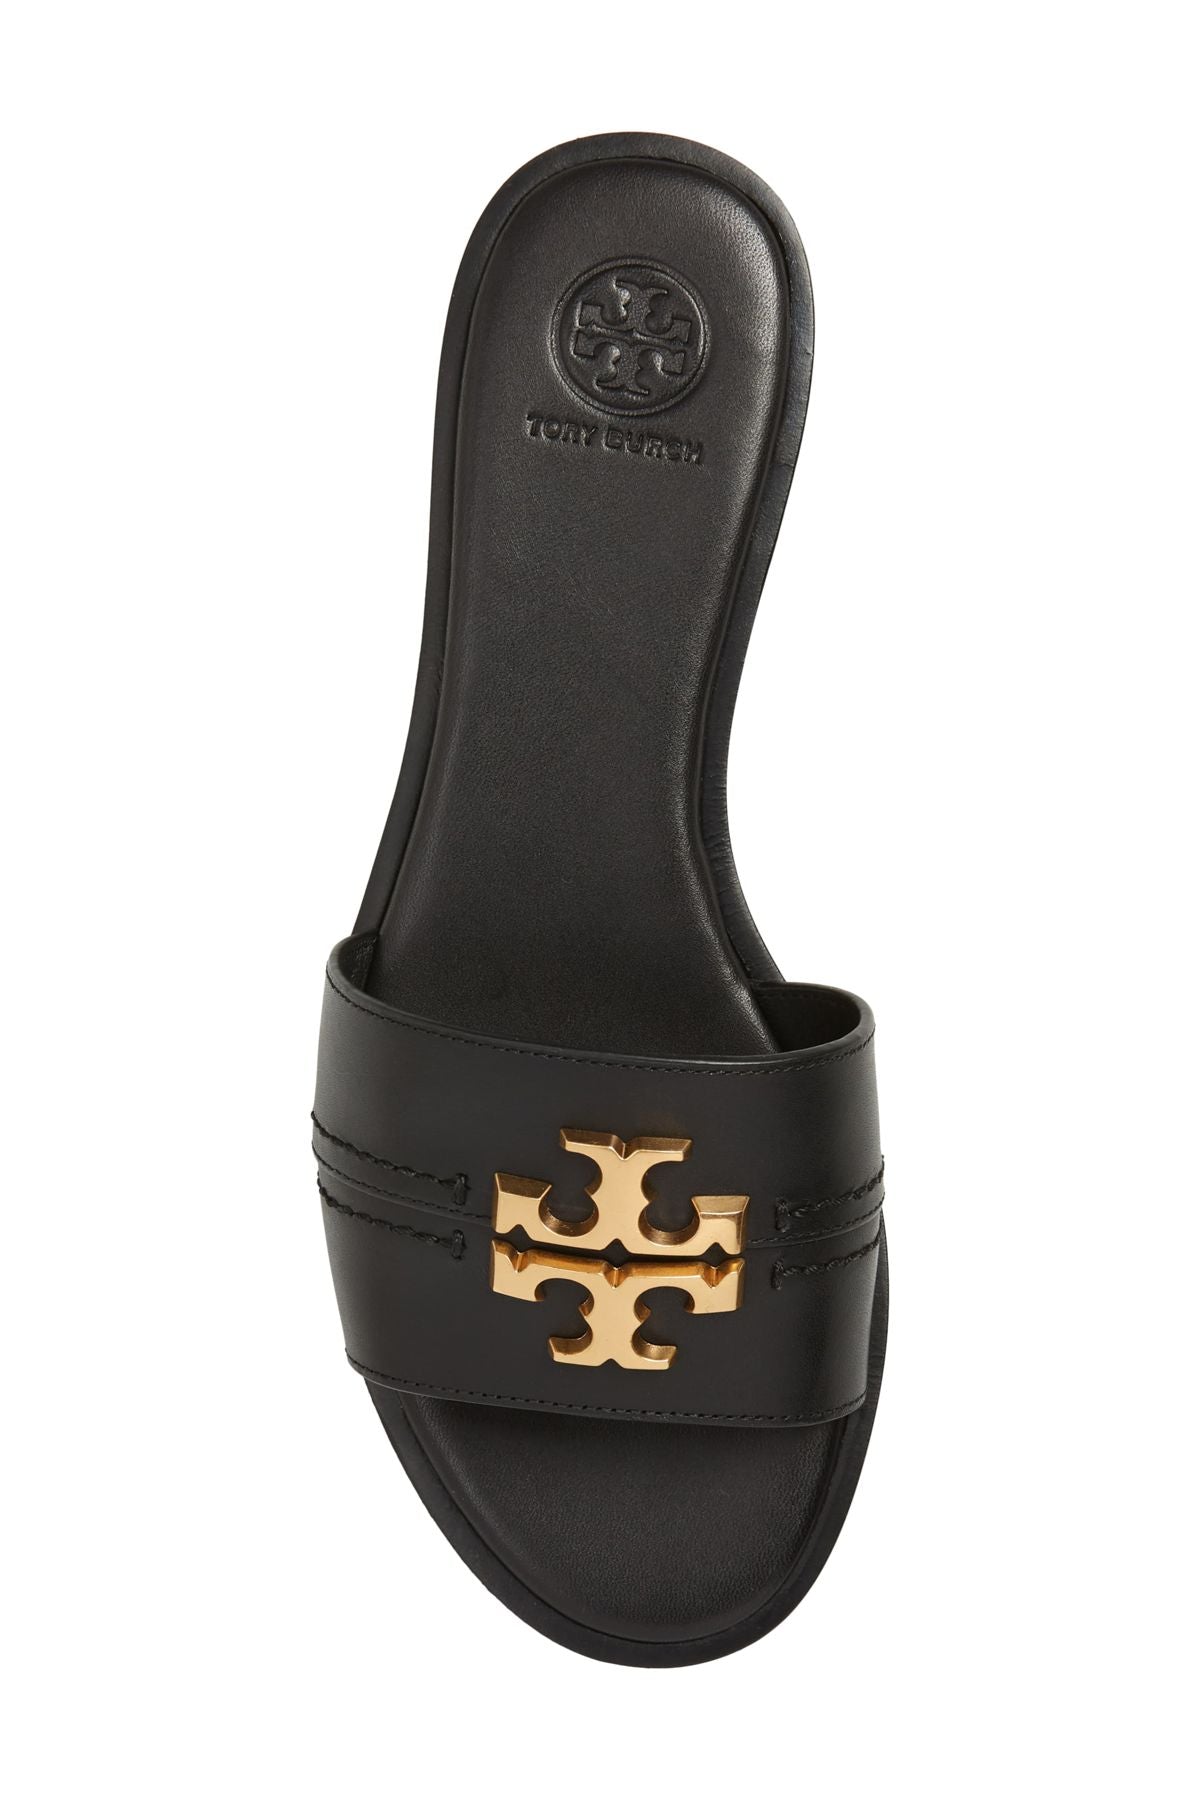 Everly Slide Sandals in Perfect Black